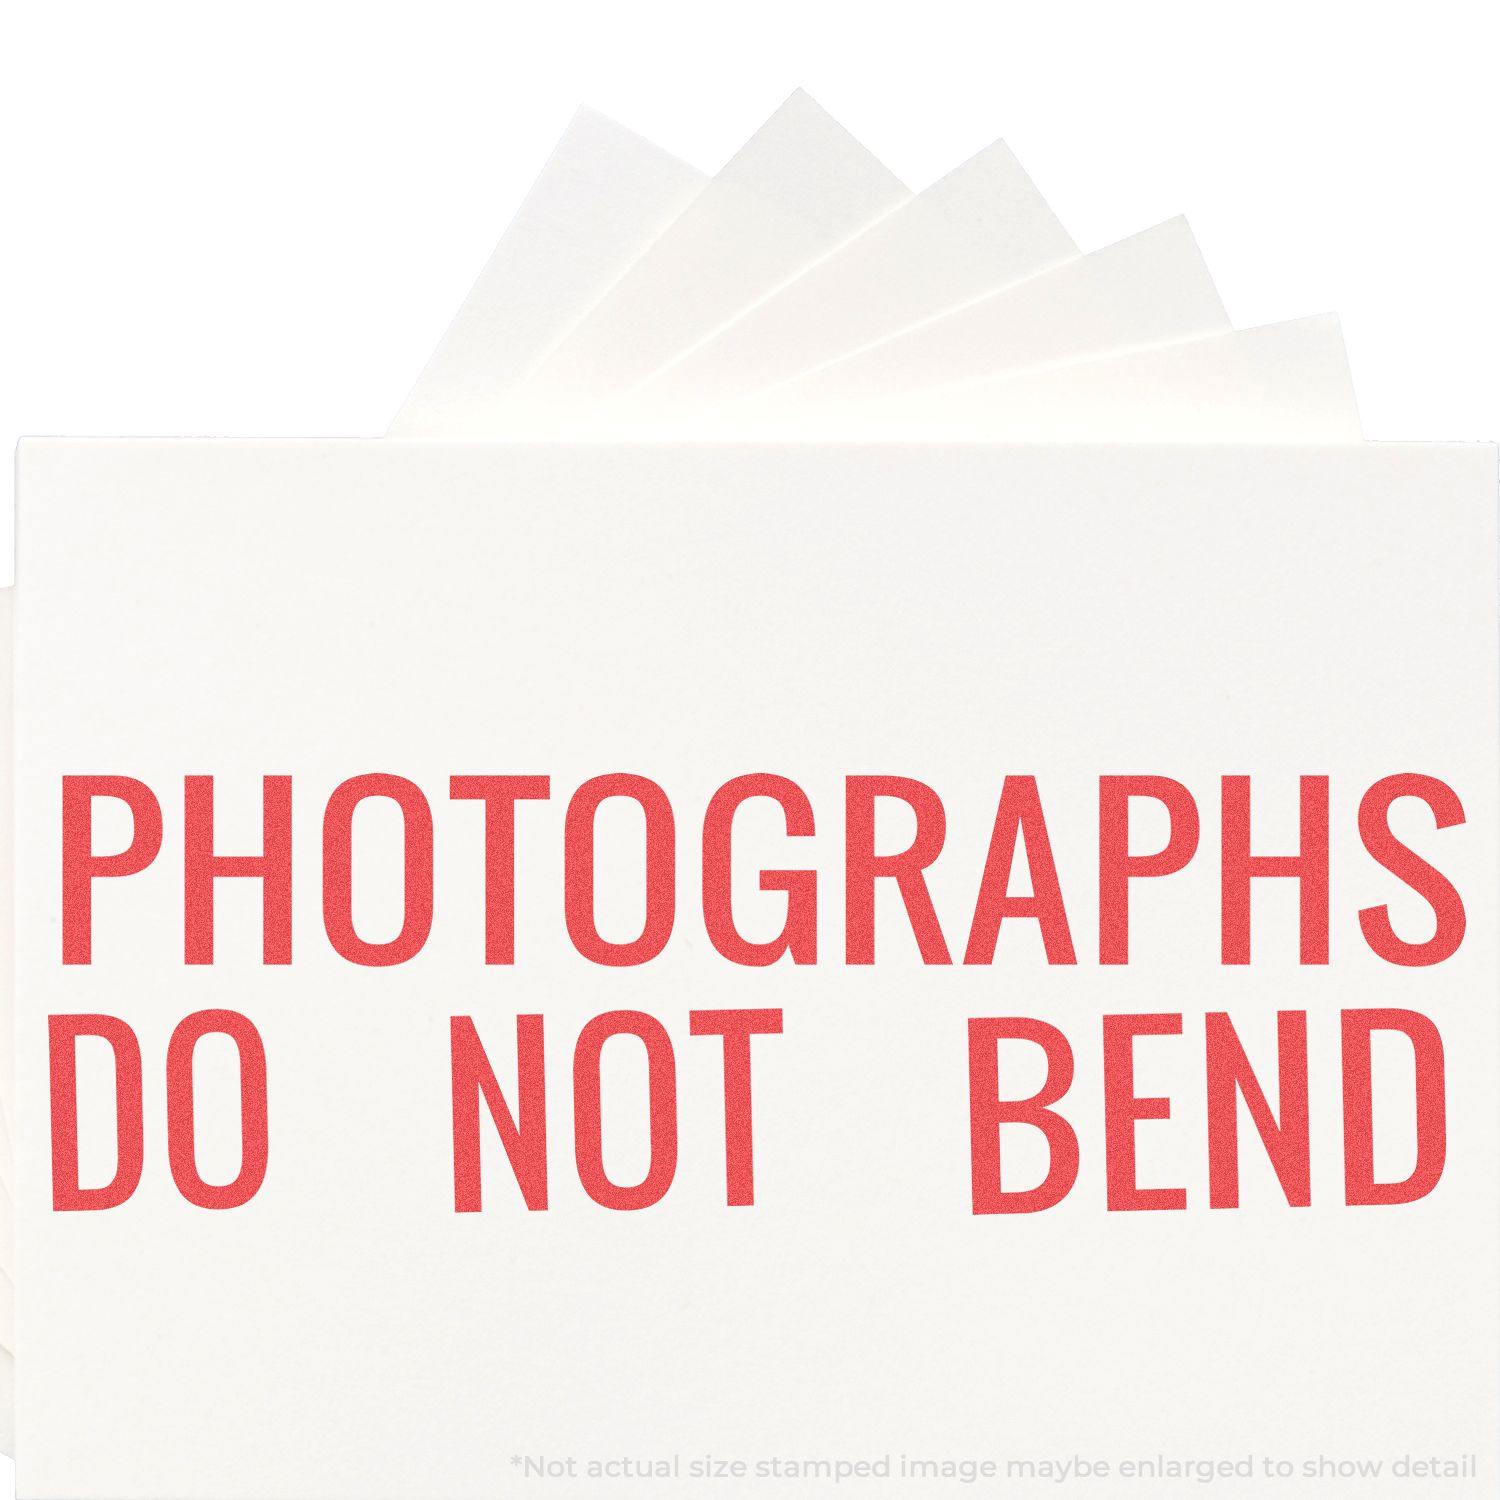 In Use Photo of Jumbo Photographs Do Not Bend Xstamper Stamp